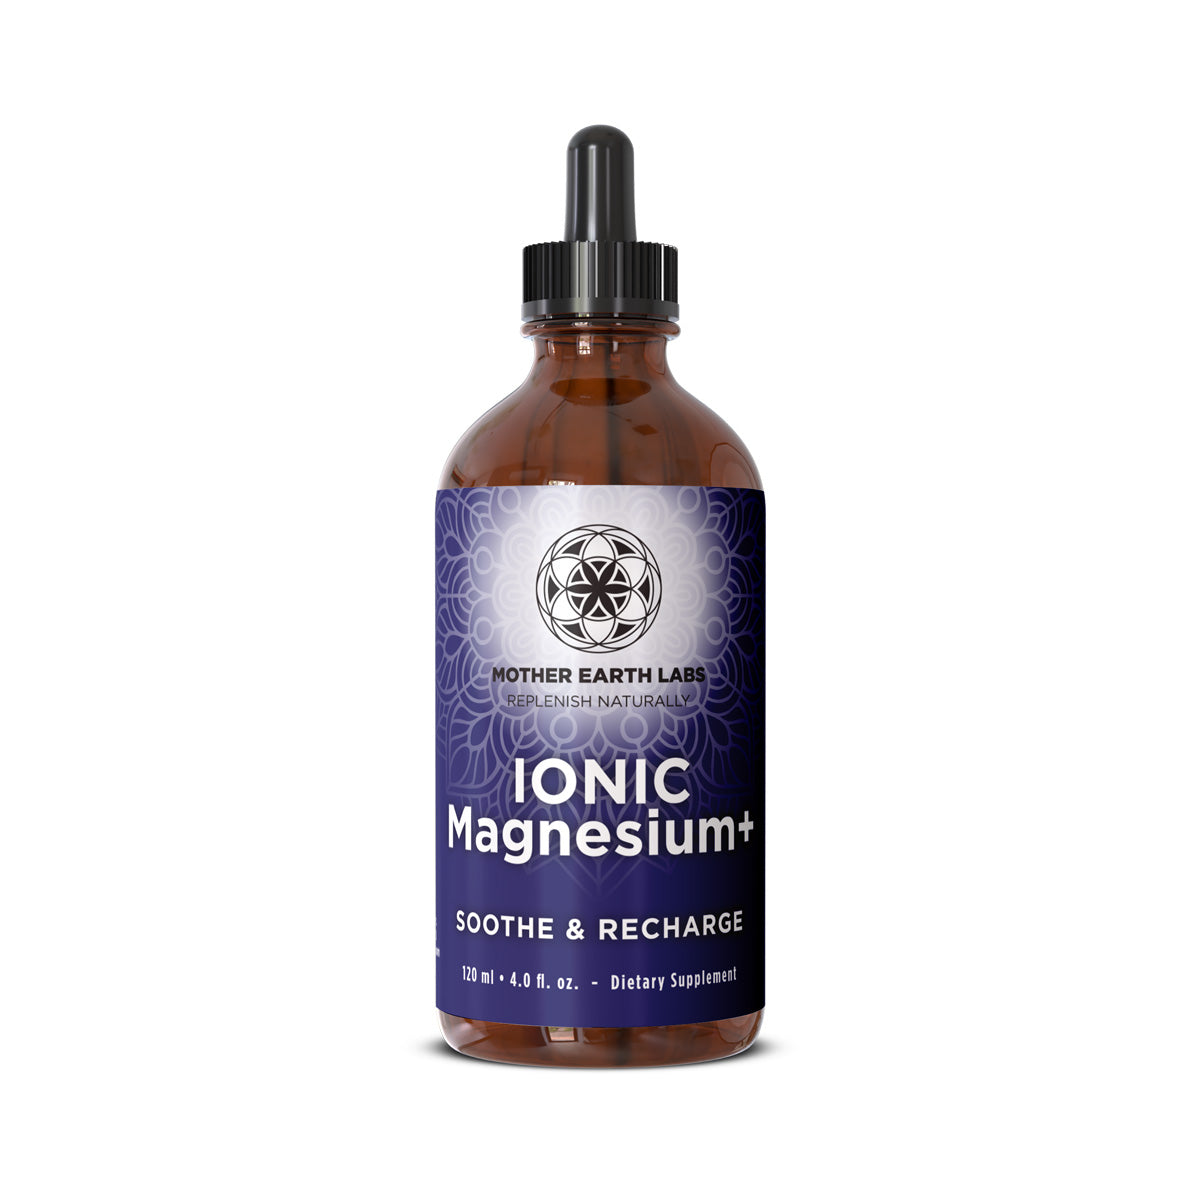 Ionic Magnesium + - 120ml | Mother Earth Labs